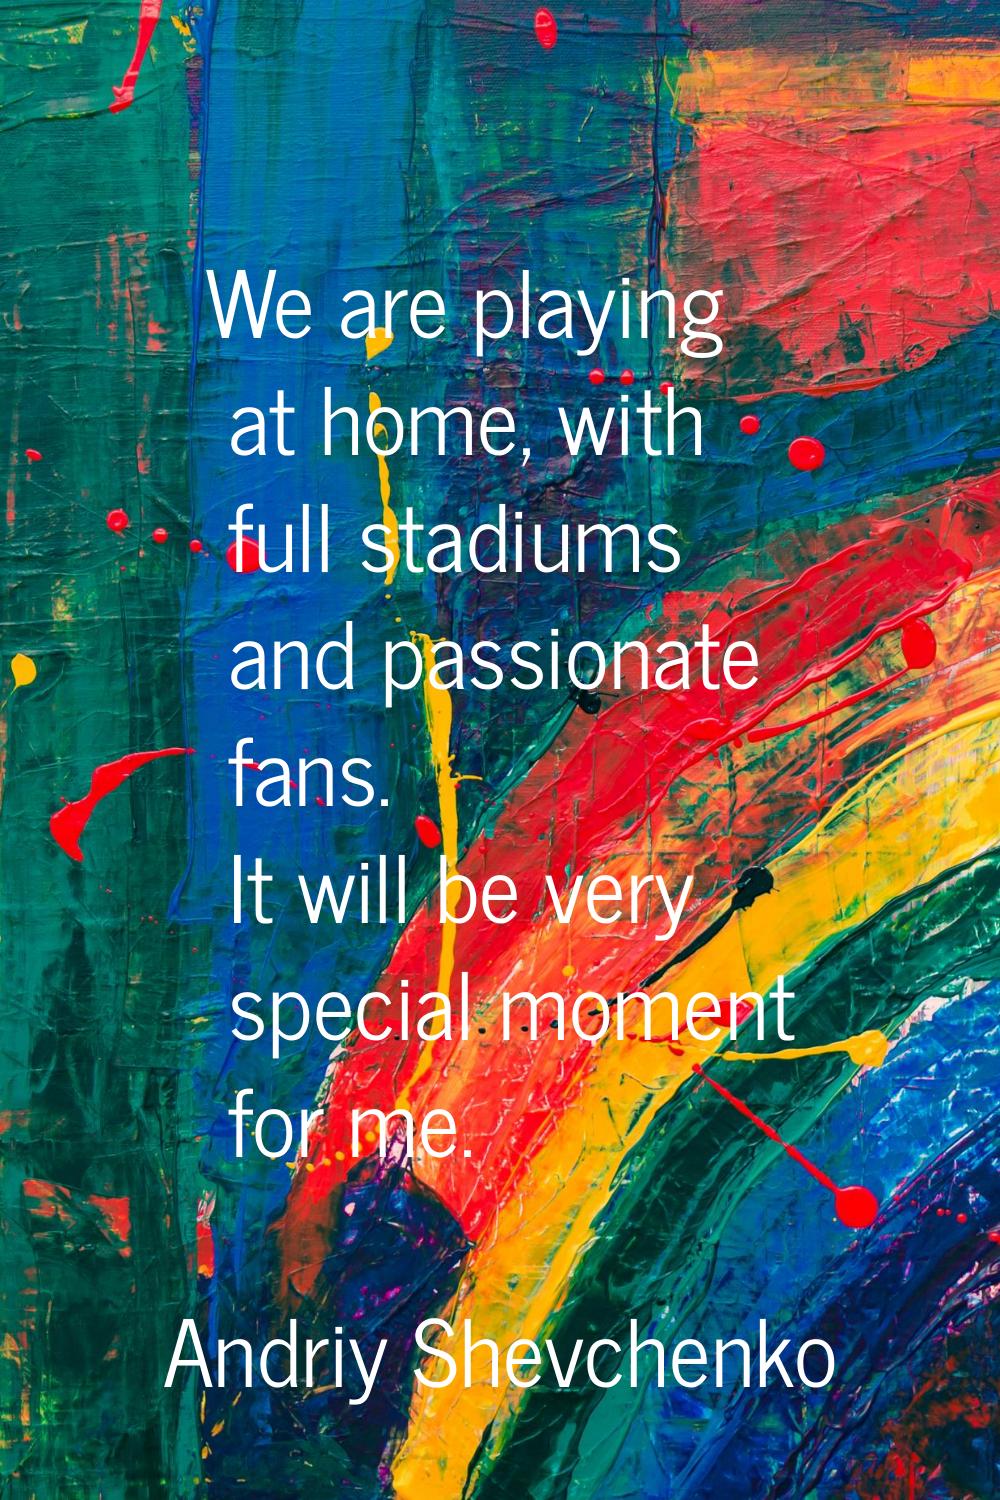 We are playing at home, with full stadiums and passionate fans. It will be very special moment for 